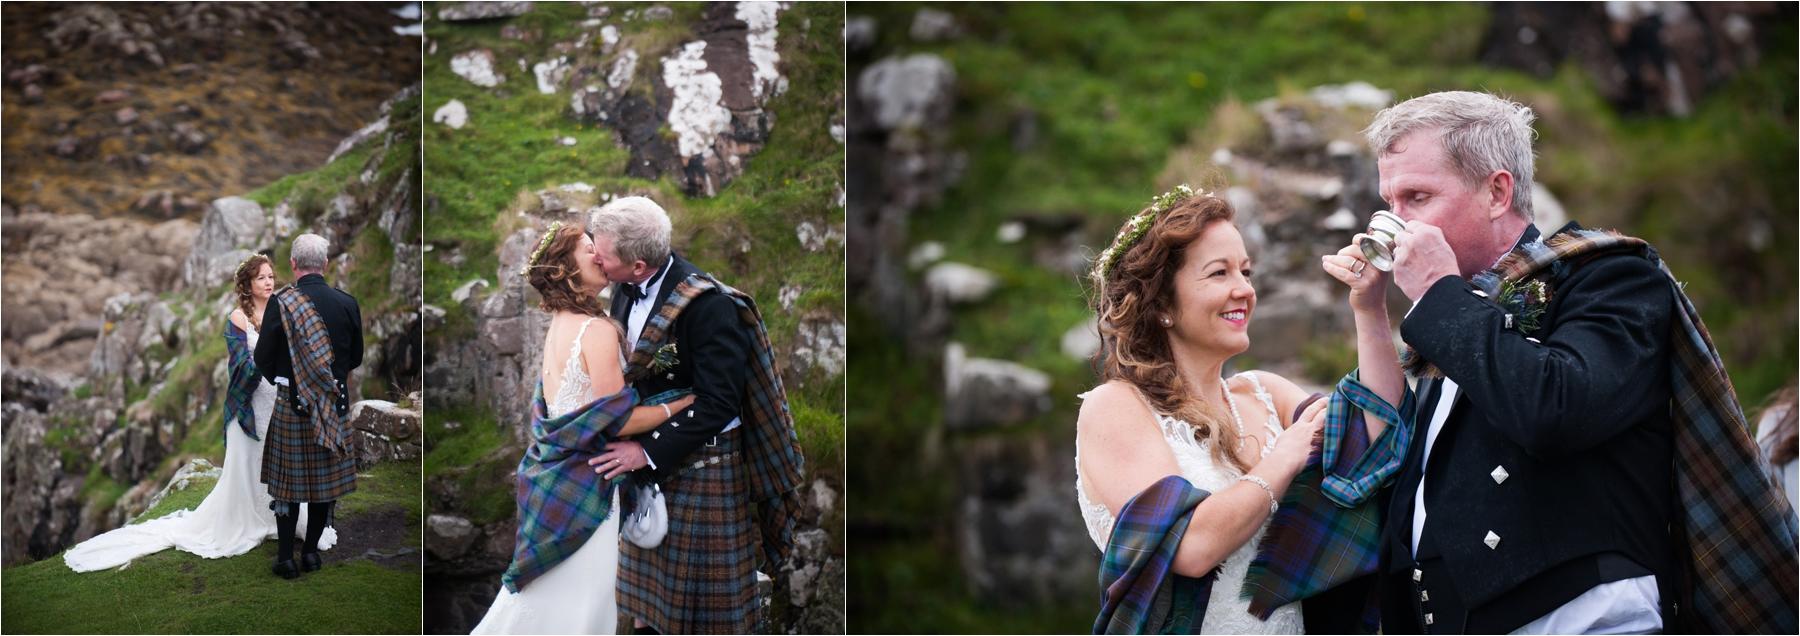 A bride and groom kiss after their humanist marriage ceremony in the ruined Dunscaith Castle. 